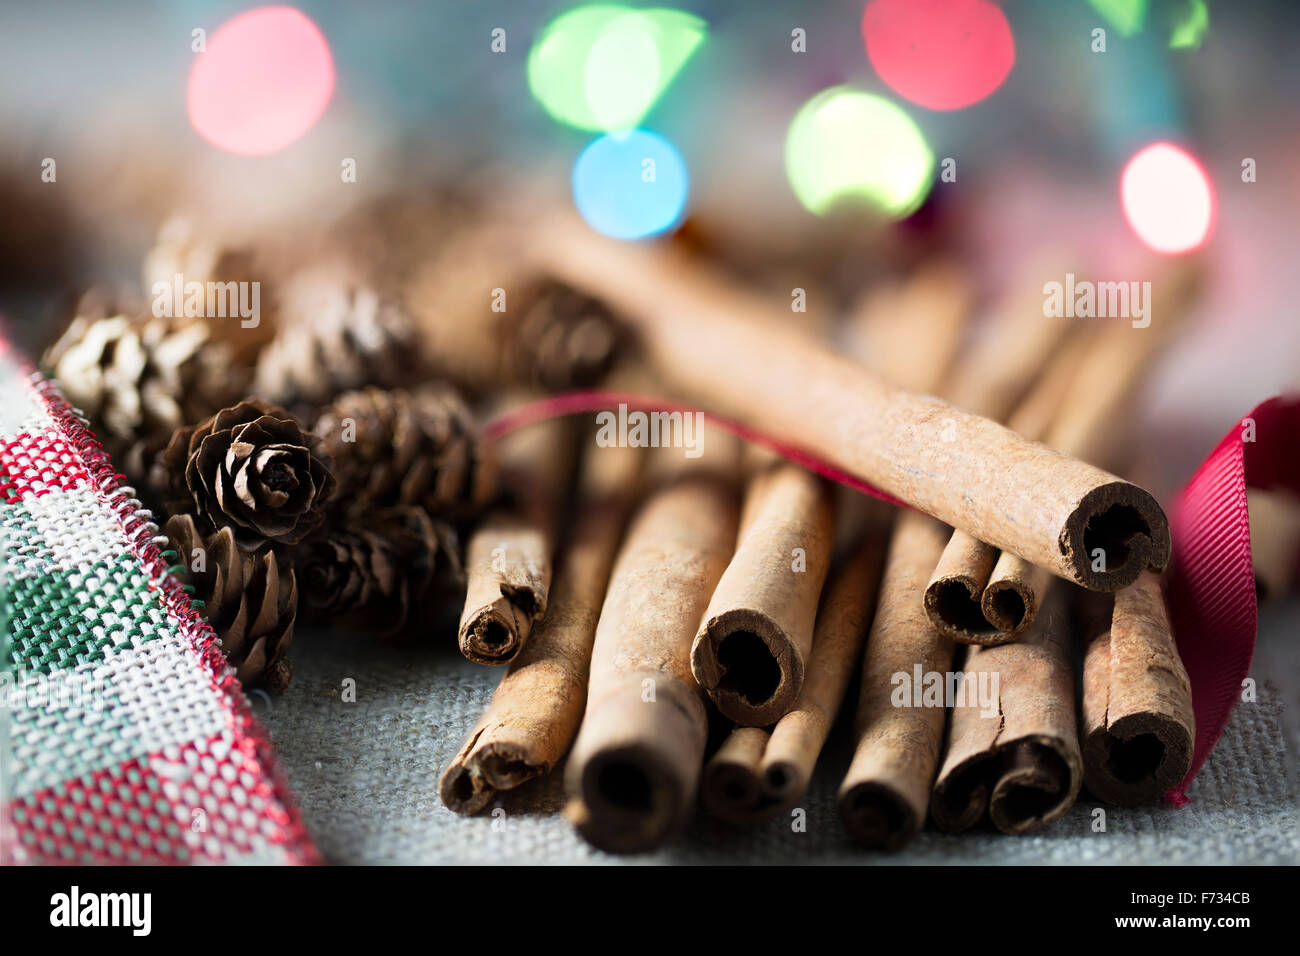 Cinnamon sticks close up with small pine cones and festive holiday lights in the background Stock Photo